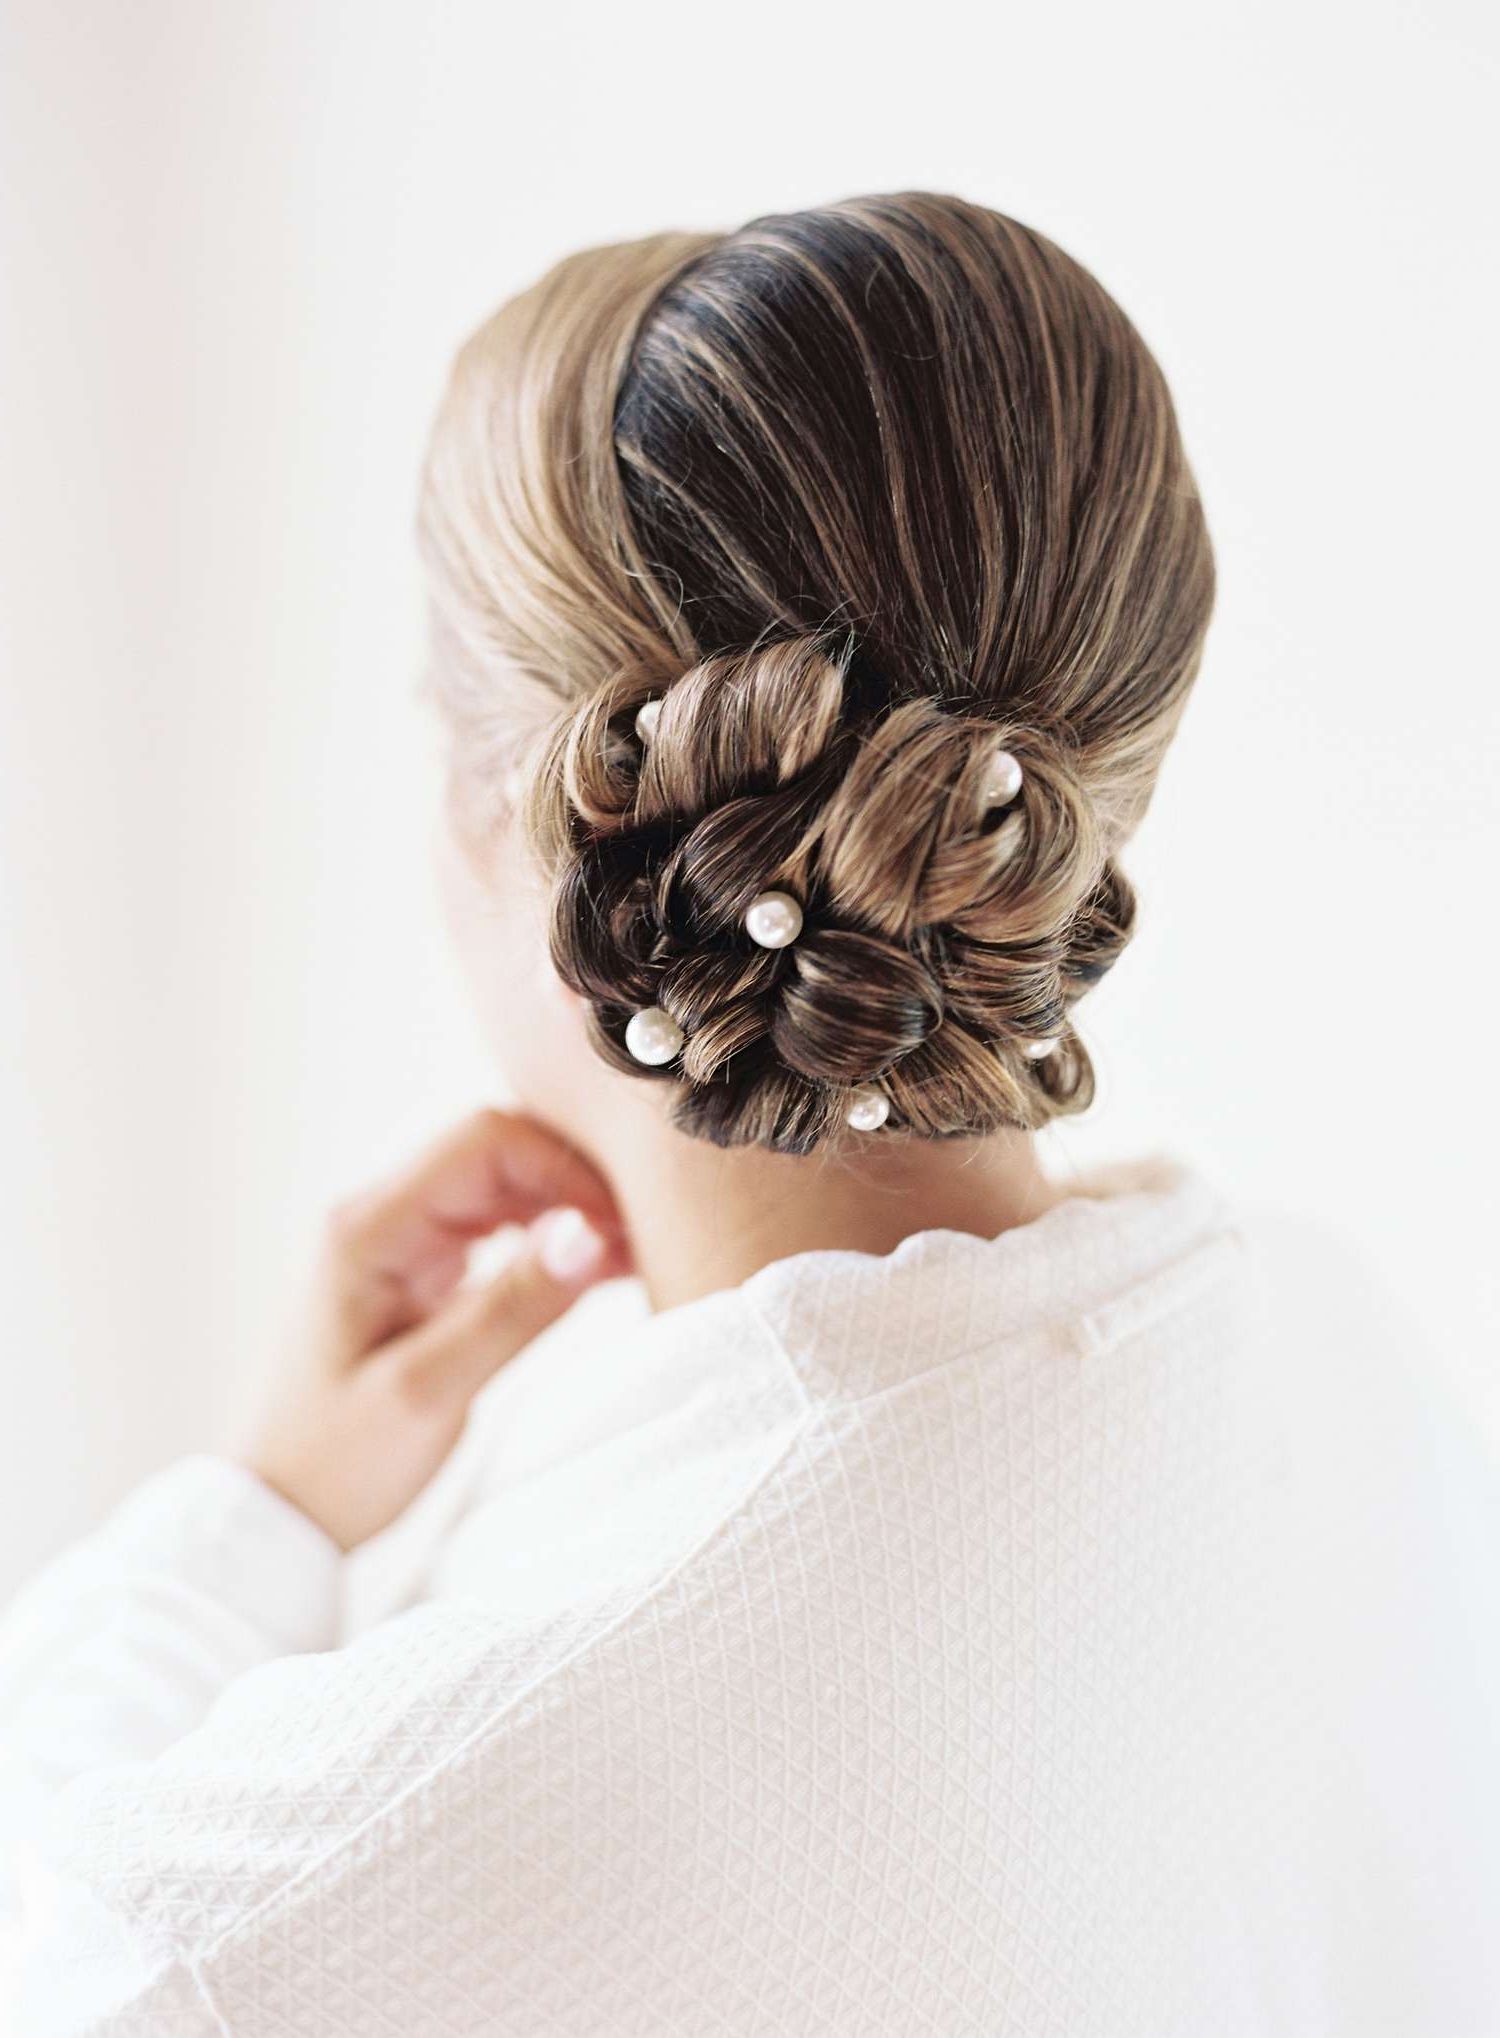 10 Low Bun Wedding Hairstyles For Every Type Of Bride With Regard To Knotted Side Bun Updo (View 24 of 25)